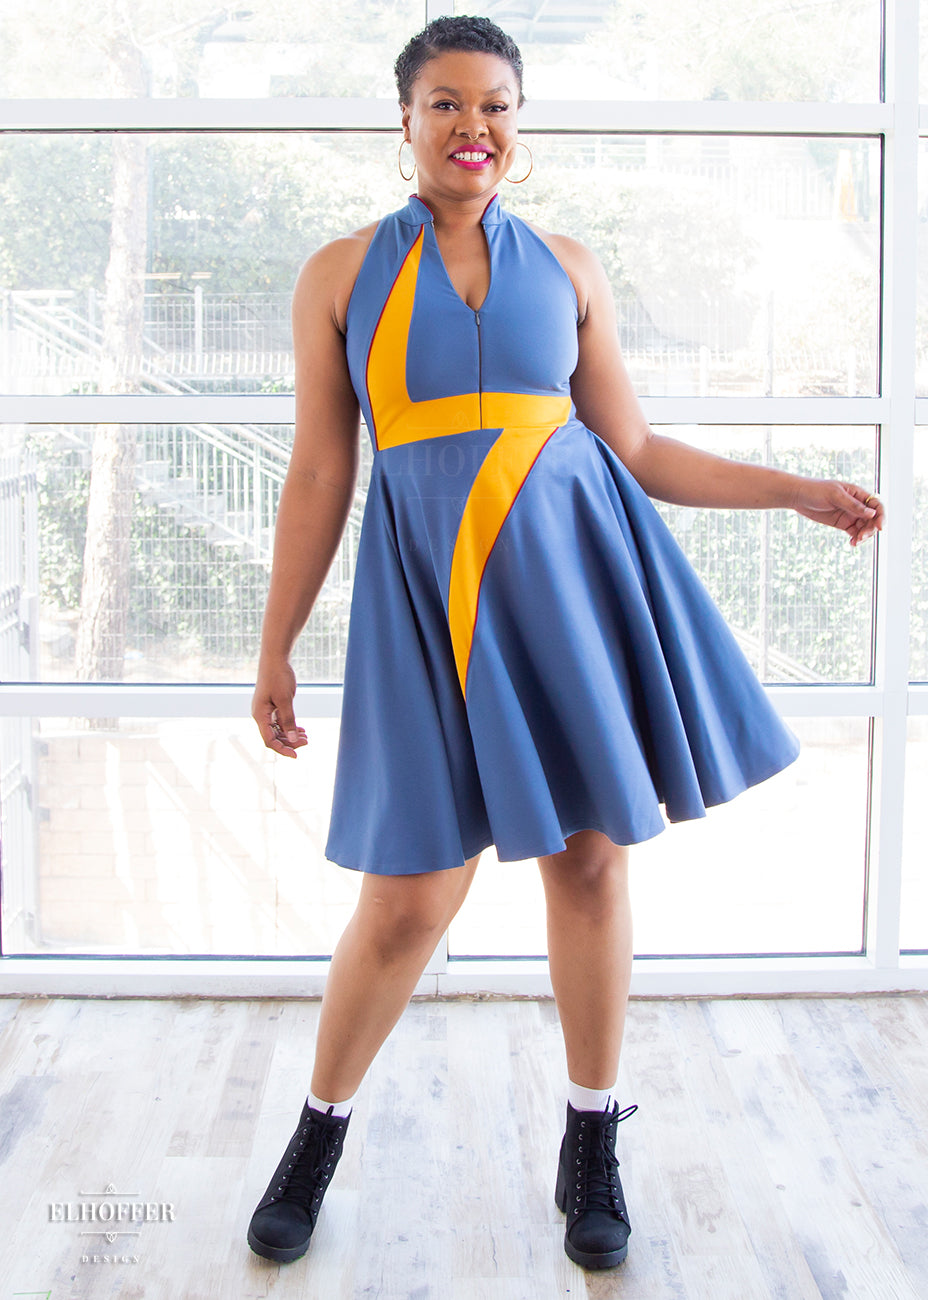 Desiree, a size large medium dark skinned model with very short dark hair, wears a high-necked sleeveless blue dress. The dress is piped in crimson and has a yellow lightening bolt emblazoned over the front of it. There is a zip down the middle down to the waist that she has unzipped to show a bit of décolletage.